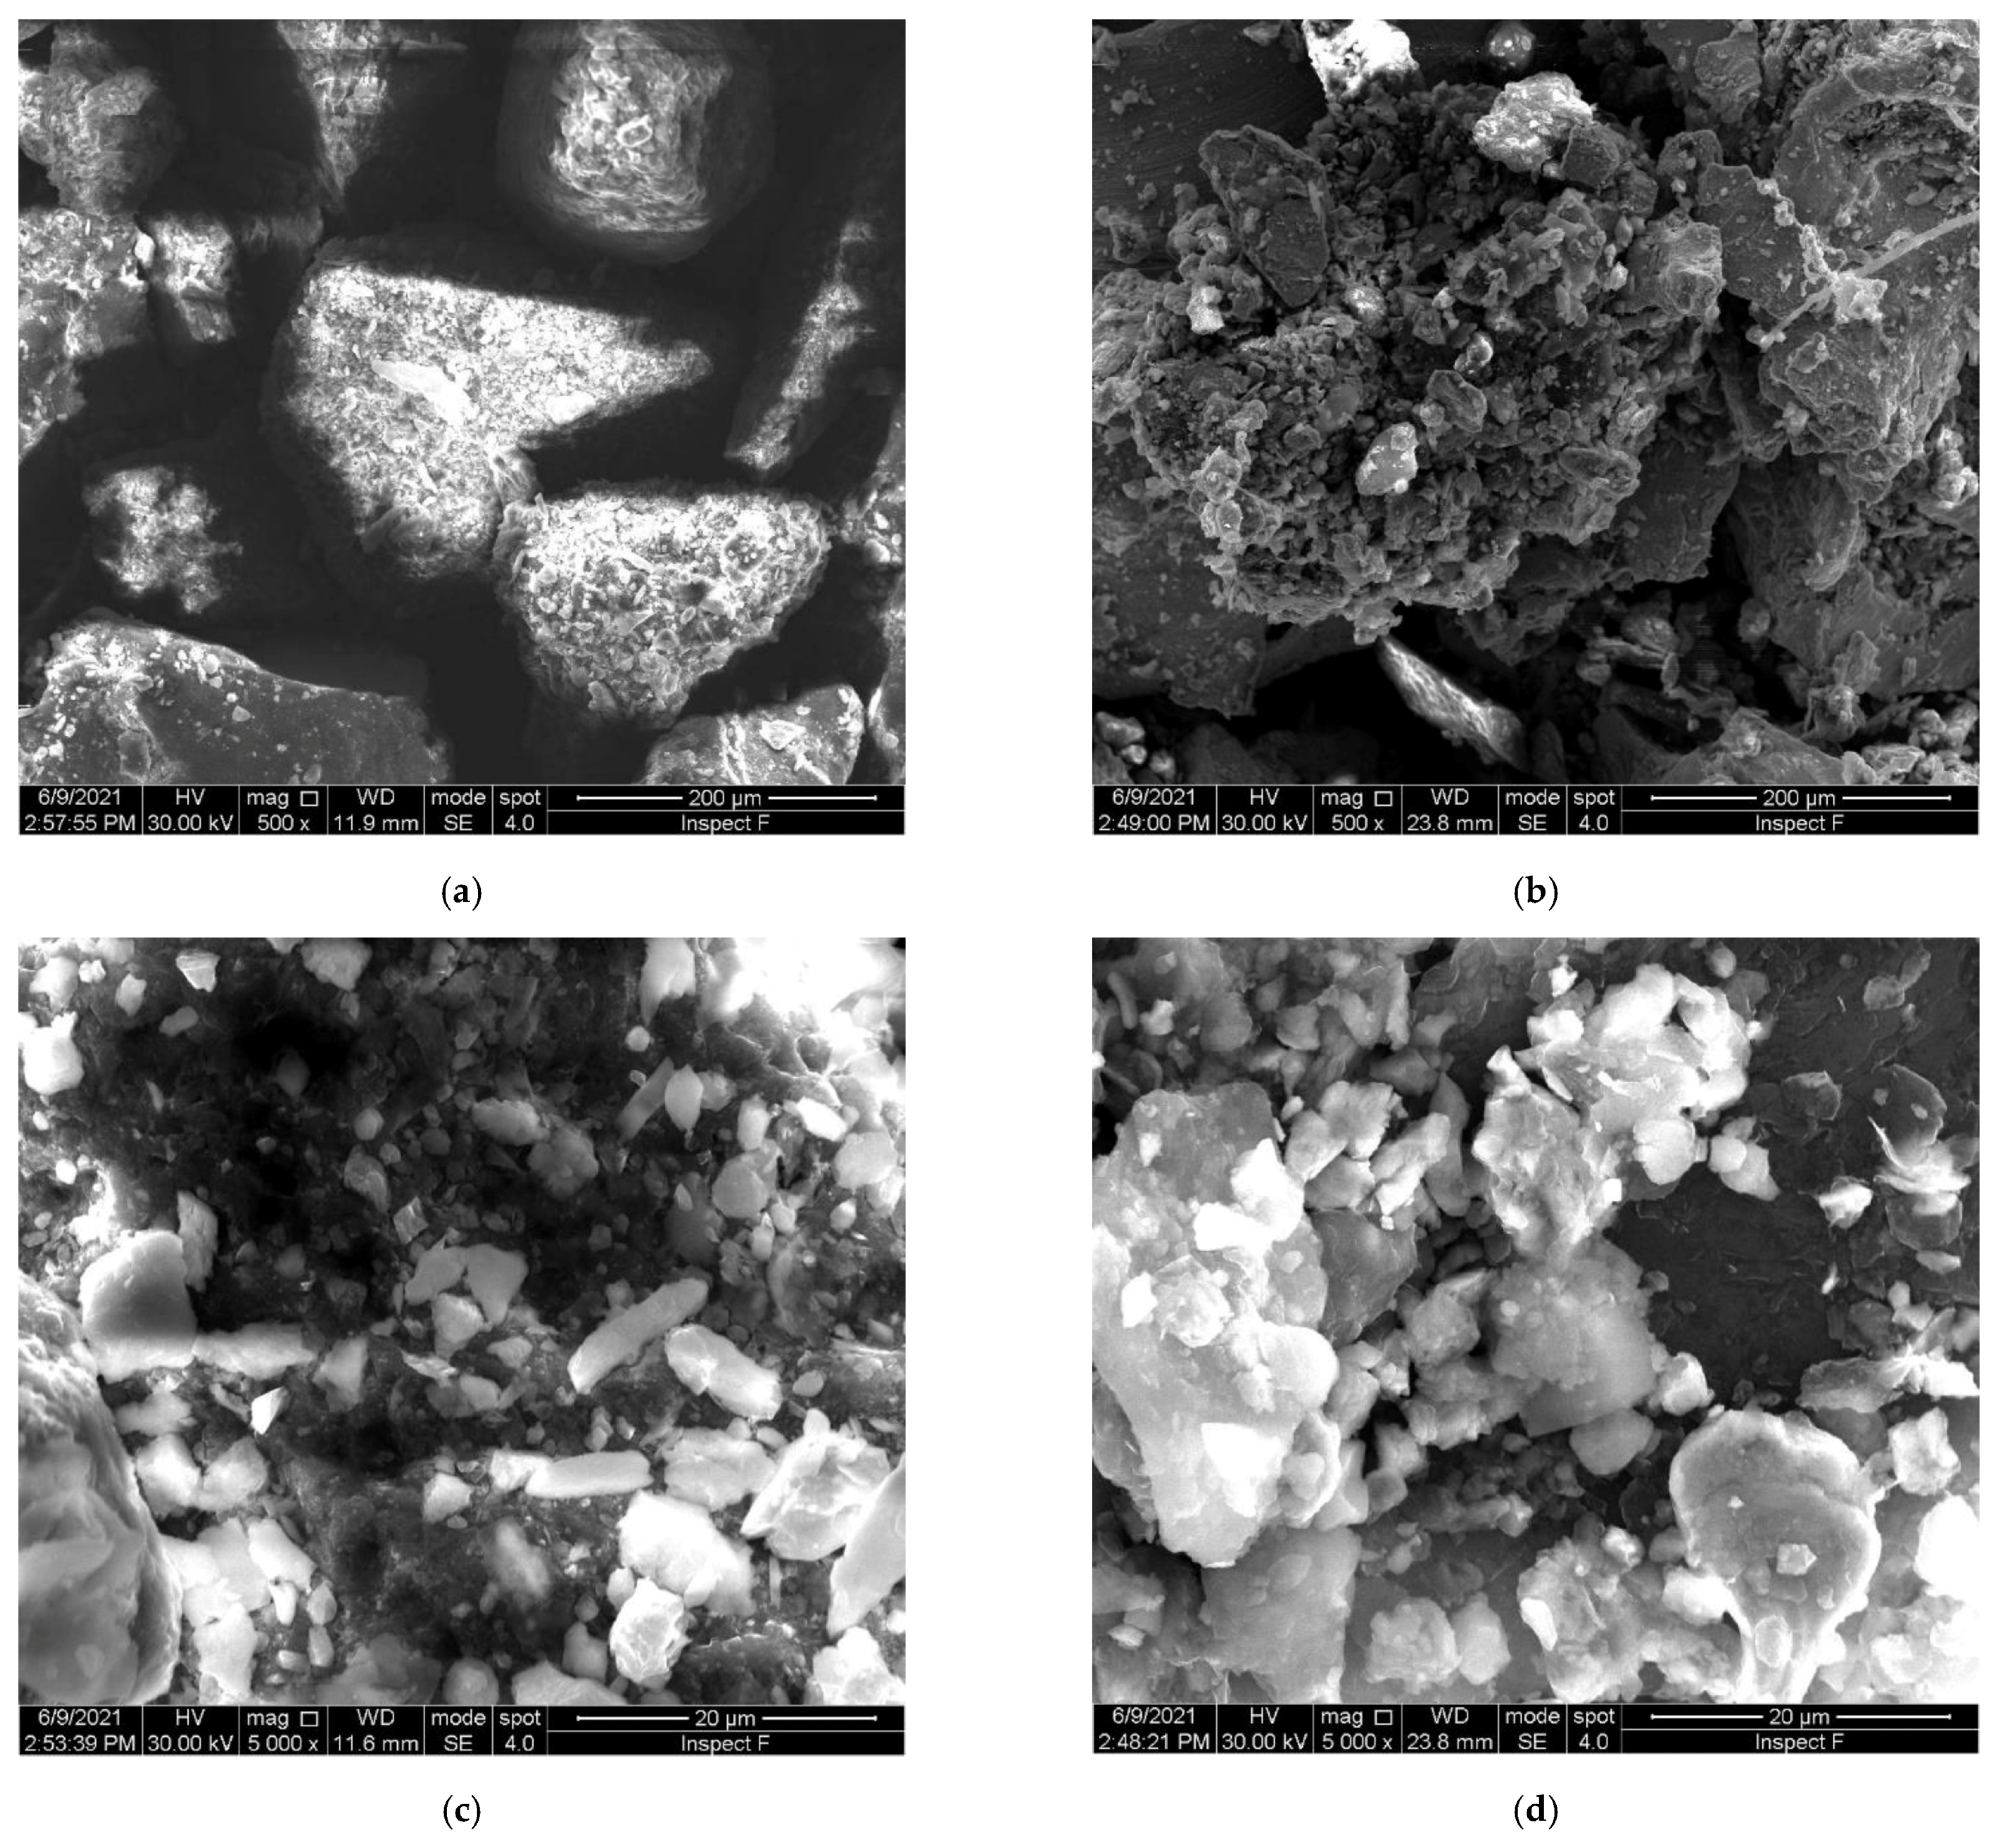 SEM images of the FNS and IFW. (a) FNS, 0.5 kx, (b) IFW, 0.5 kx, (c) FNS, 5 kx, (d) IFW, 5 kx.